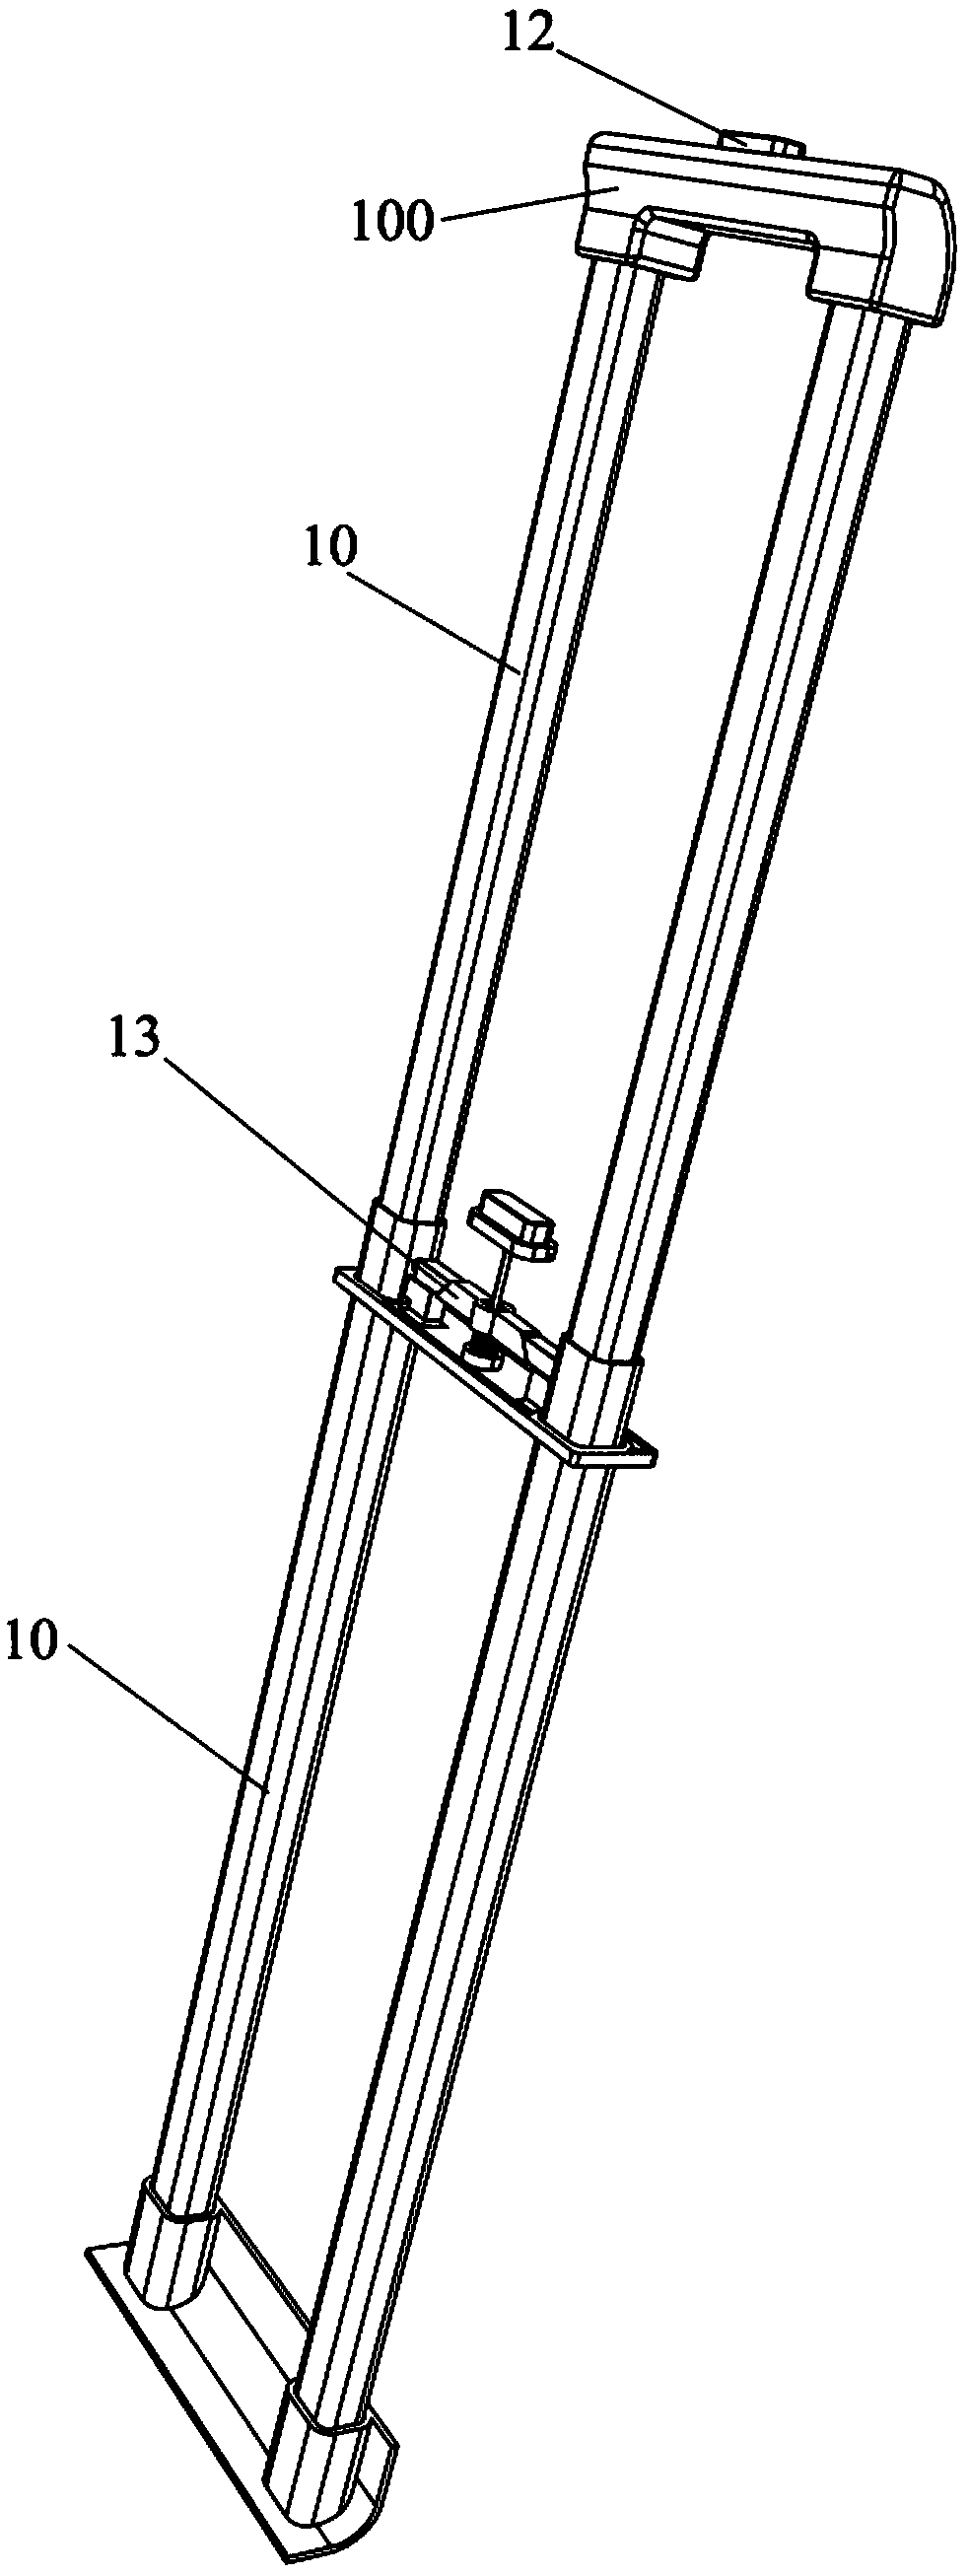 Pull rod device and trolley bag